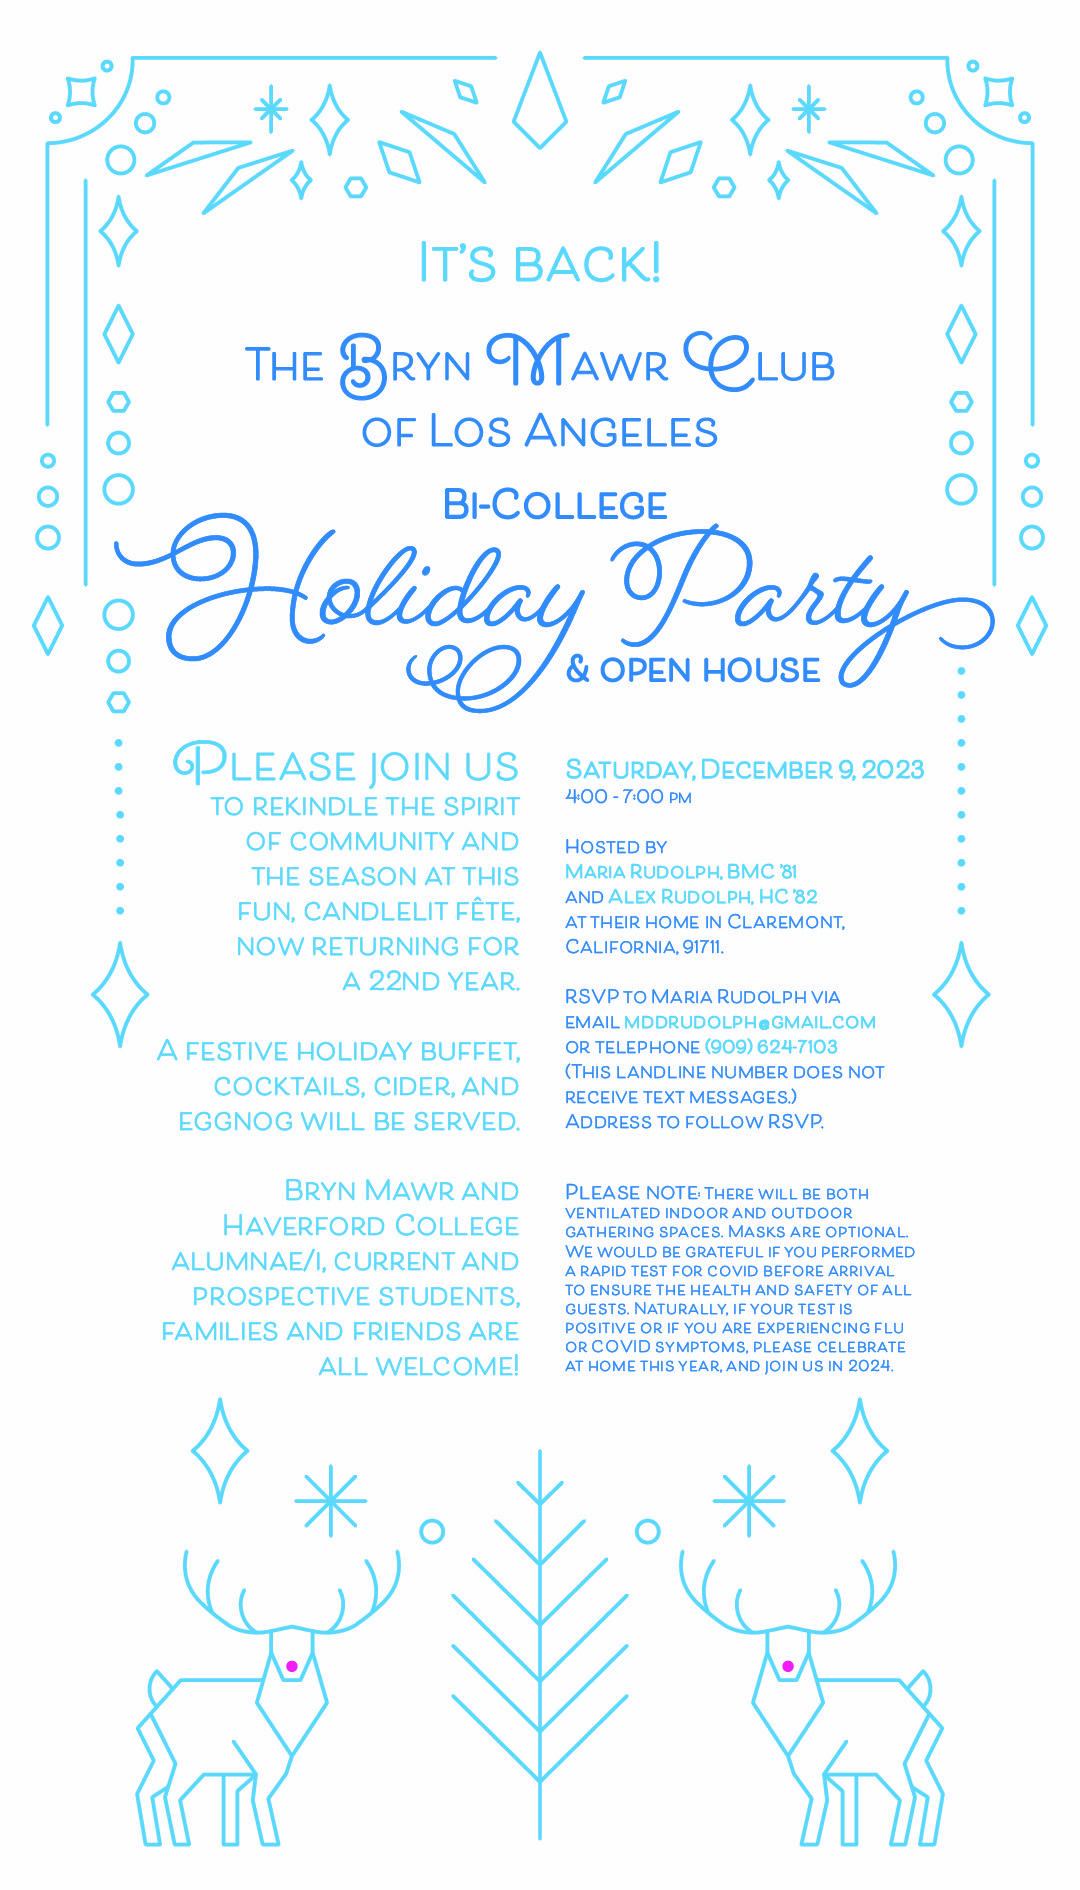 The Bryn Mawr Club of Los Angeles Bi-College Holiday Party and Open House is back!  
Saturday, December 9, 2023 4:00 - 7:00 PM 
Please join us to rekindle the spirit of community and the season at this fun, candlelit fête, now returning for a 22nd year. A festive holiday buffet, cocktails, cider, and eggnog will be served. 

Bryn Mawr and Haverford College alumnae/i, current and prospective students, families and friends all welcome! 

Hosted by Maria Rudolph, BMC ’81 and Alex Rudolph, HC ’82 at their home in Claremont, California, 91711. 

RSVP:  Maria Rudolph mddrudolph@gmail.com or telephone (909) 624-7103 (this landline number does not receive text messages). Address to follow RSVP. 
Please note: There will be both ventilated indoor and outdoor gathering spaces. 

Masks are optional. We would be grateful if you performed a rapid test for COVID before arrival to ensure the health and safety of all guests. Naturally, if your test is positive or if you are experiencing flu or COVID symptoms, please celebrate at home this year, and join us in 2024.